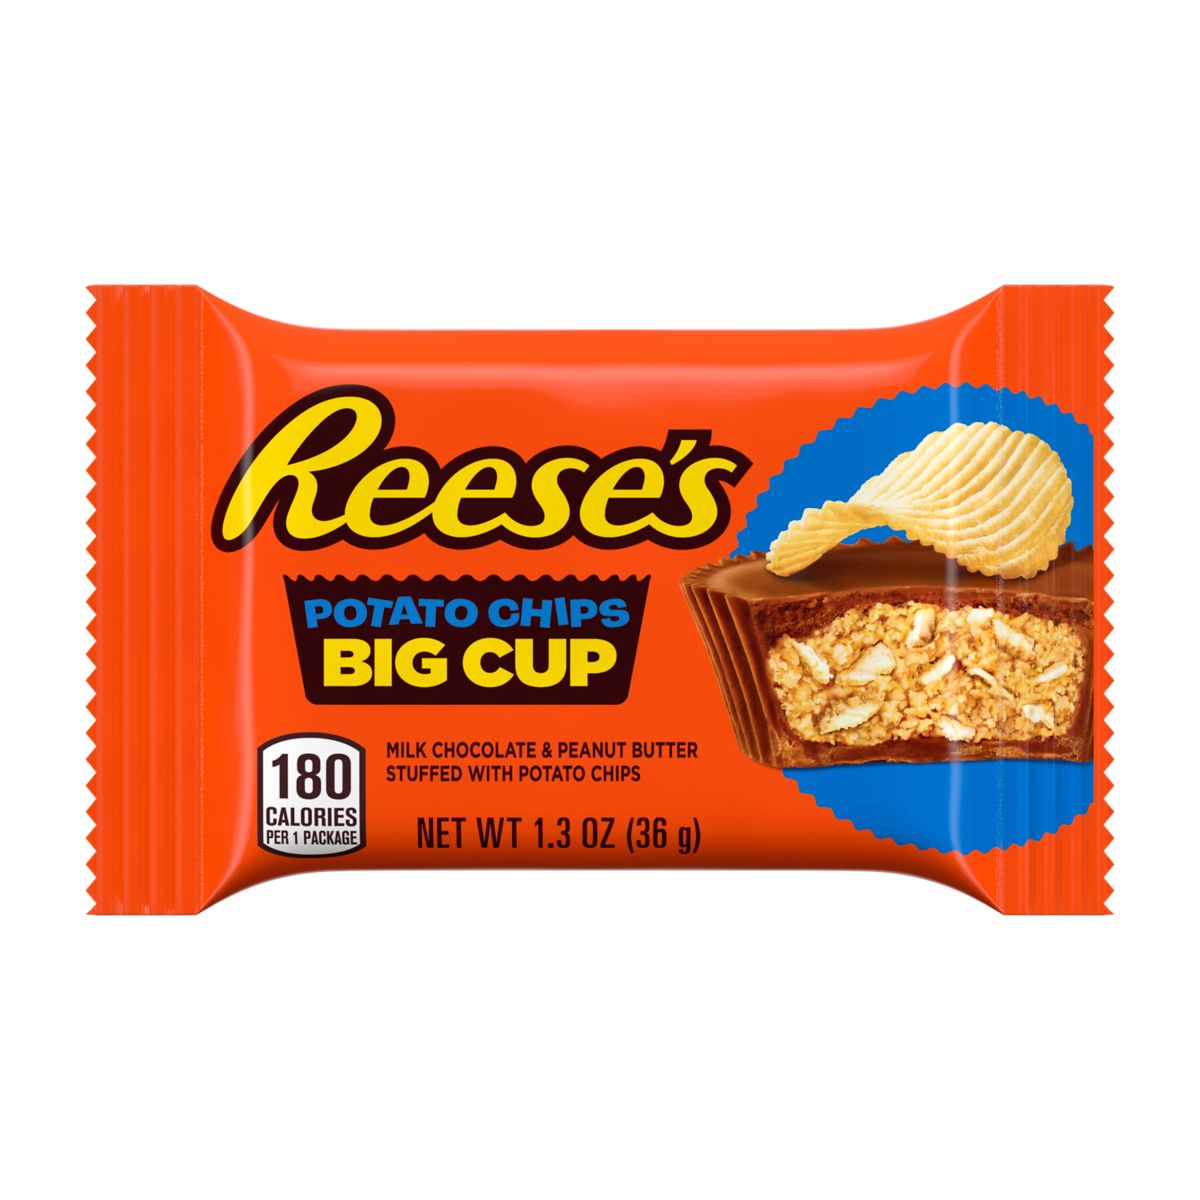 Reese’s Potato Chips Big Cup - 1.3 OZ